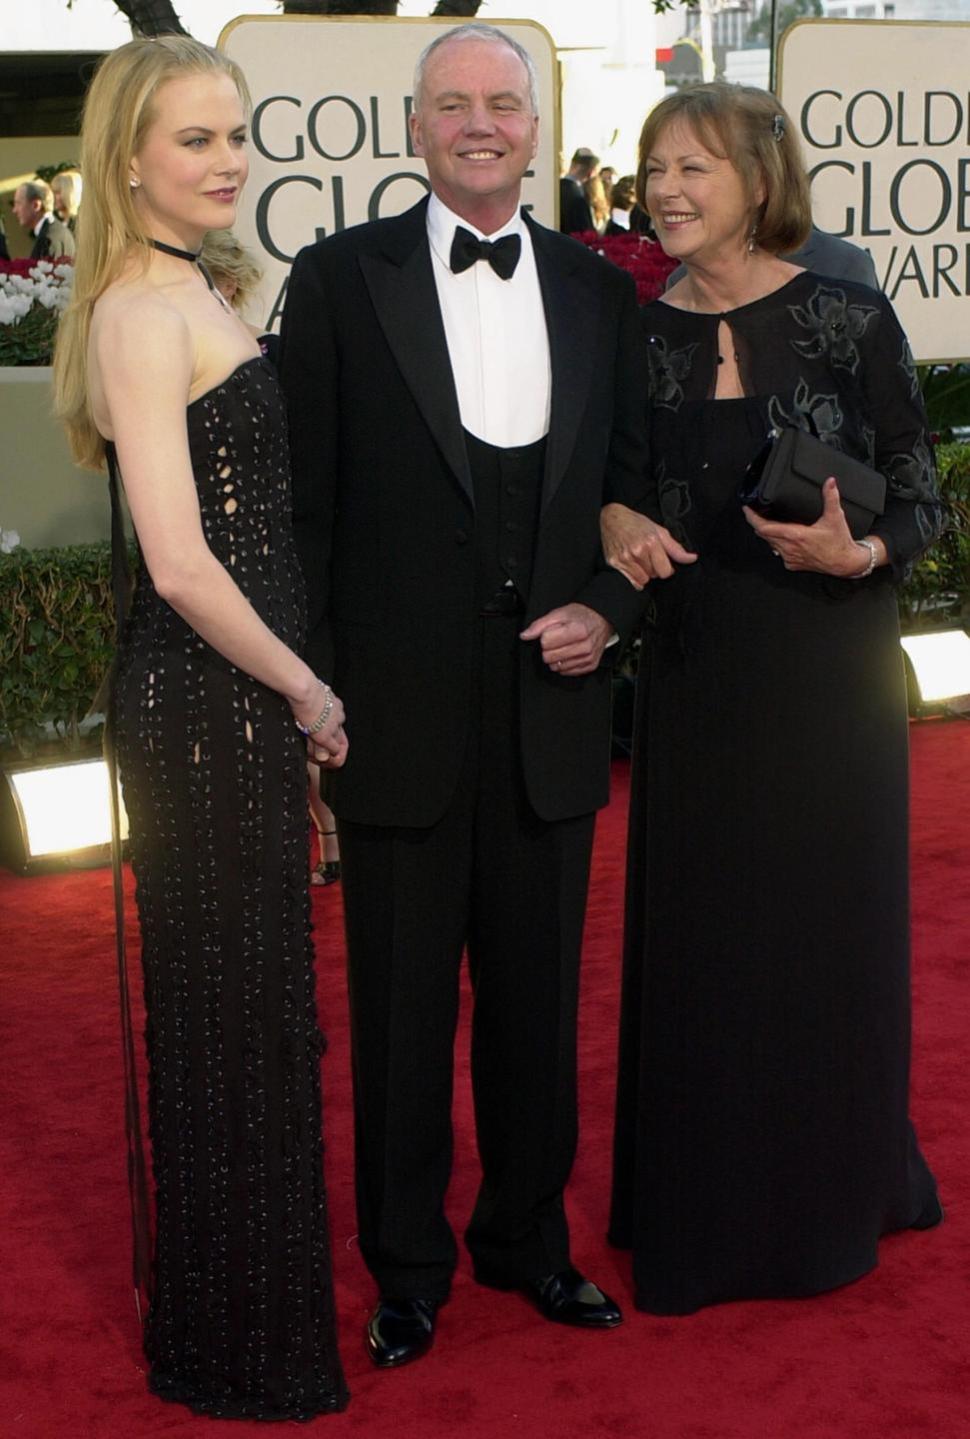 Australian actress Nicole Kidman, left, arrives with her parents Anthony and Janelle, at the 59th Annual Golden Globe Awards in 2002.